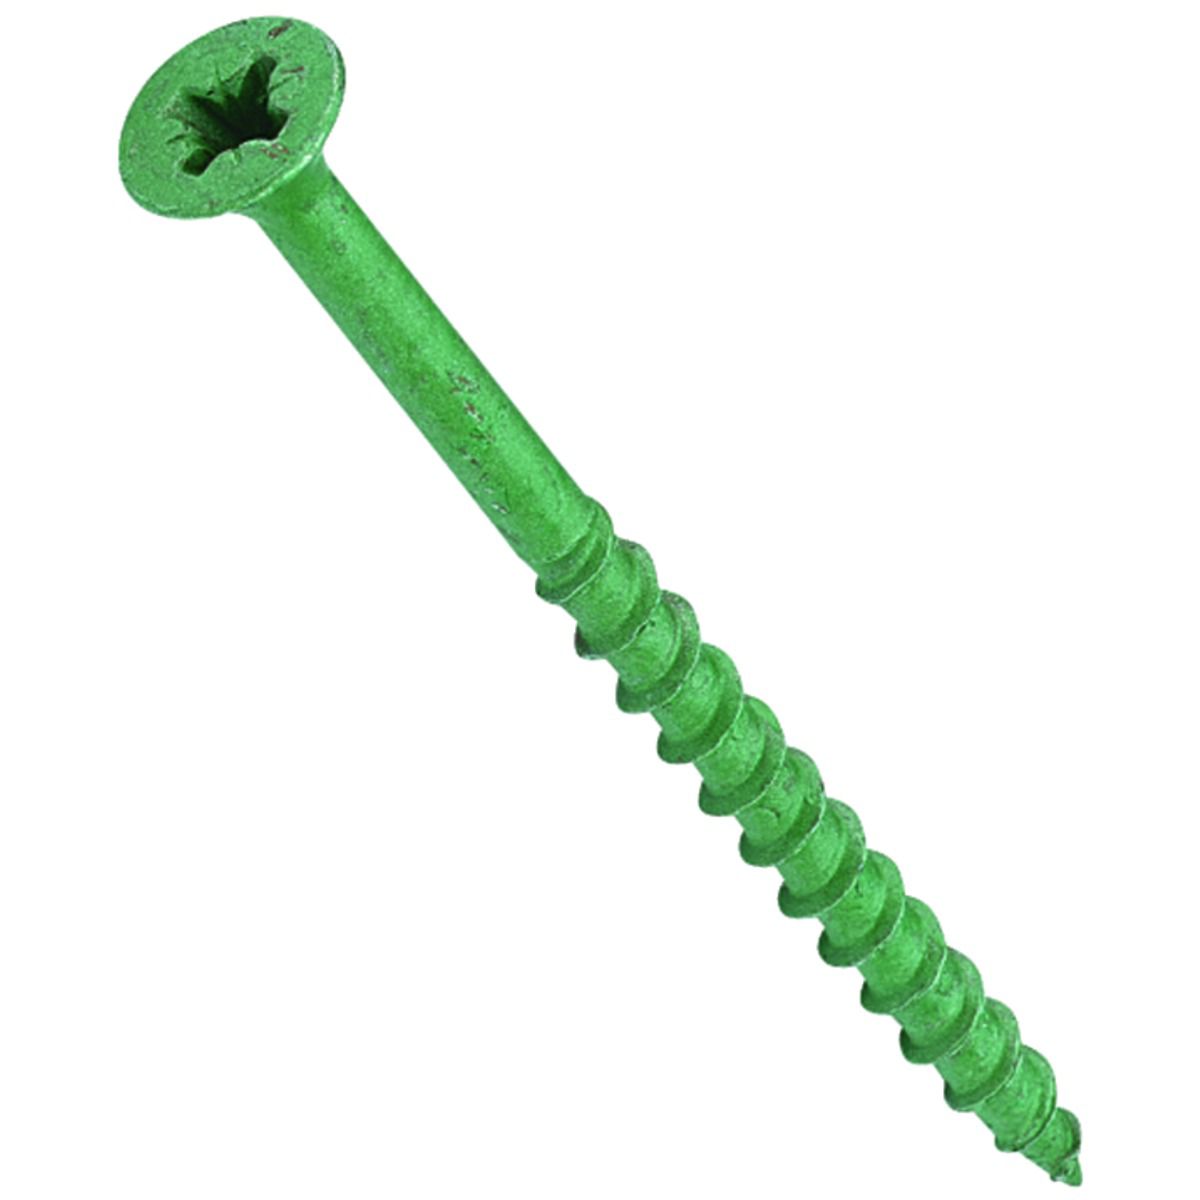 Image of Wickes External Grade Screws - Green No 8 x 23mm Pack of 25